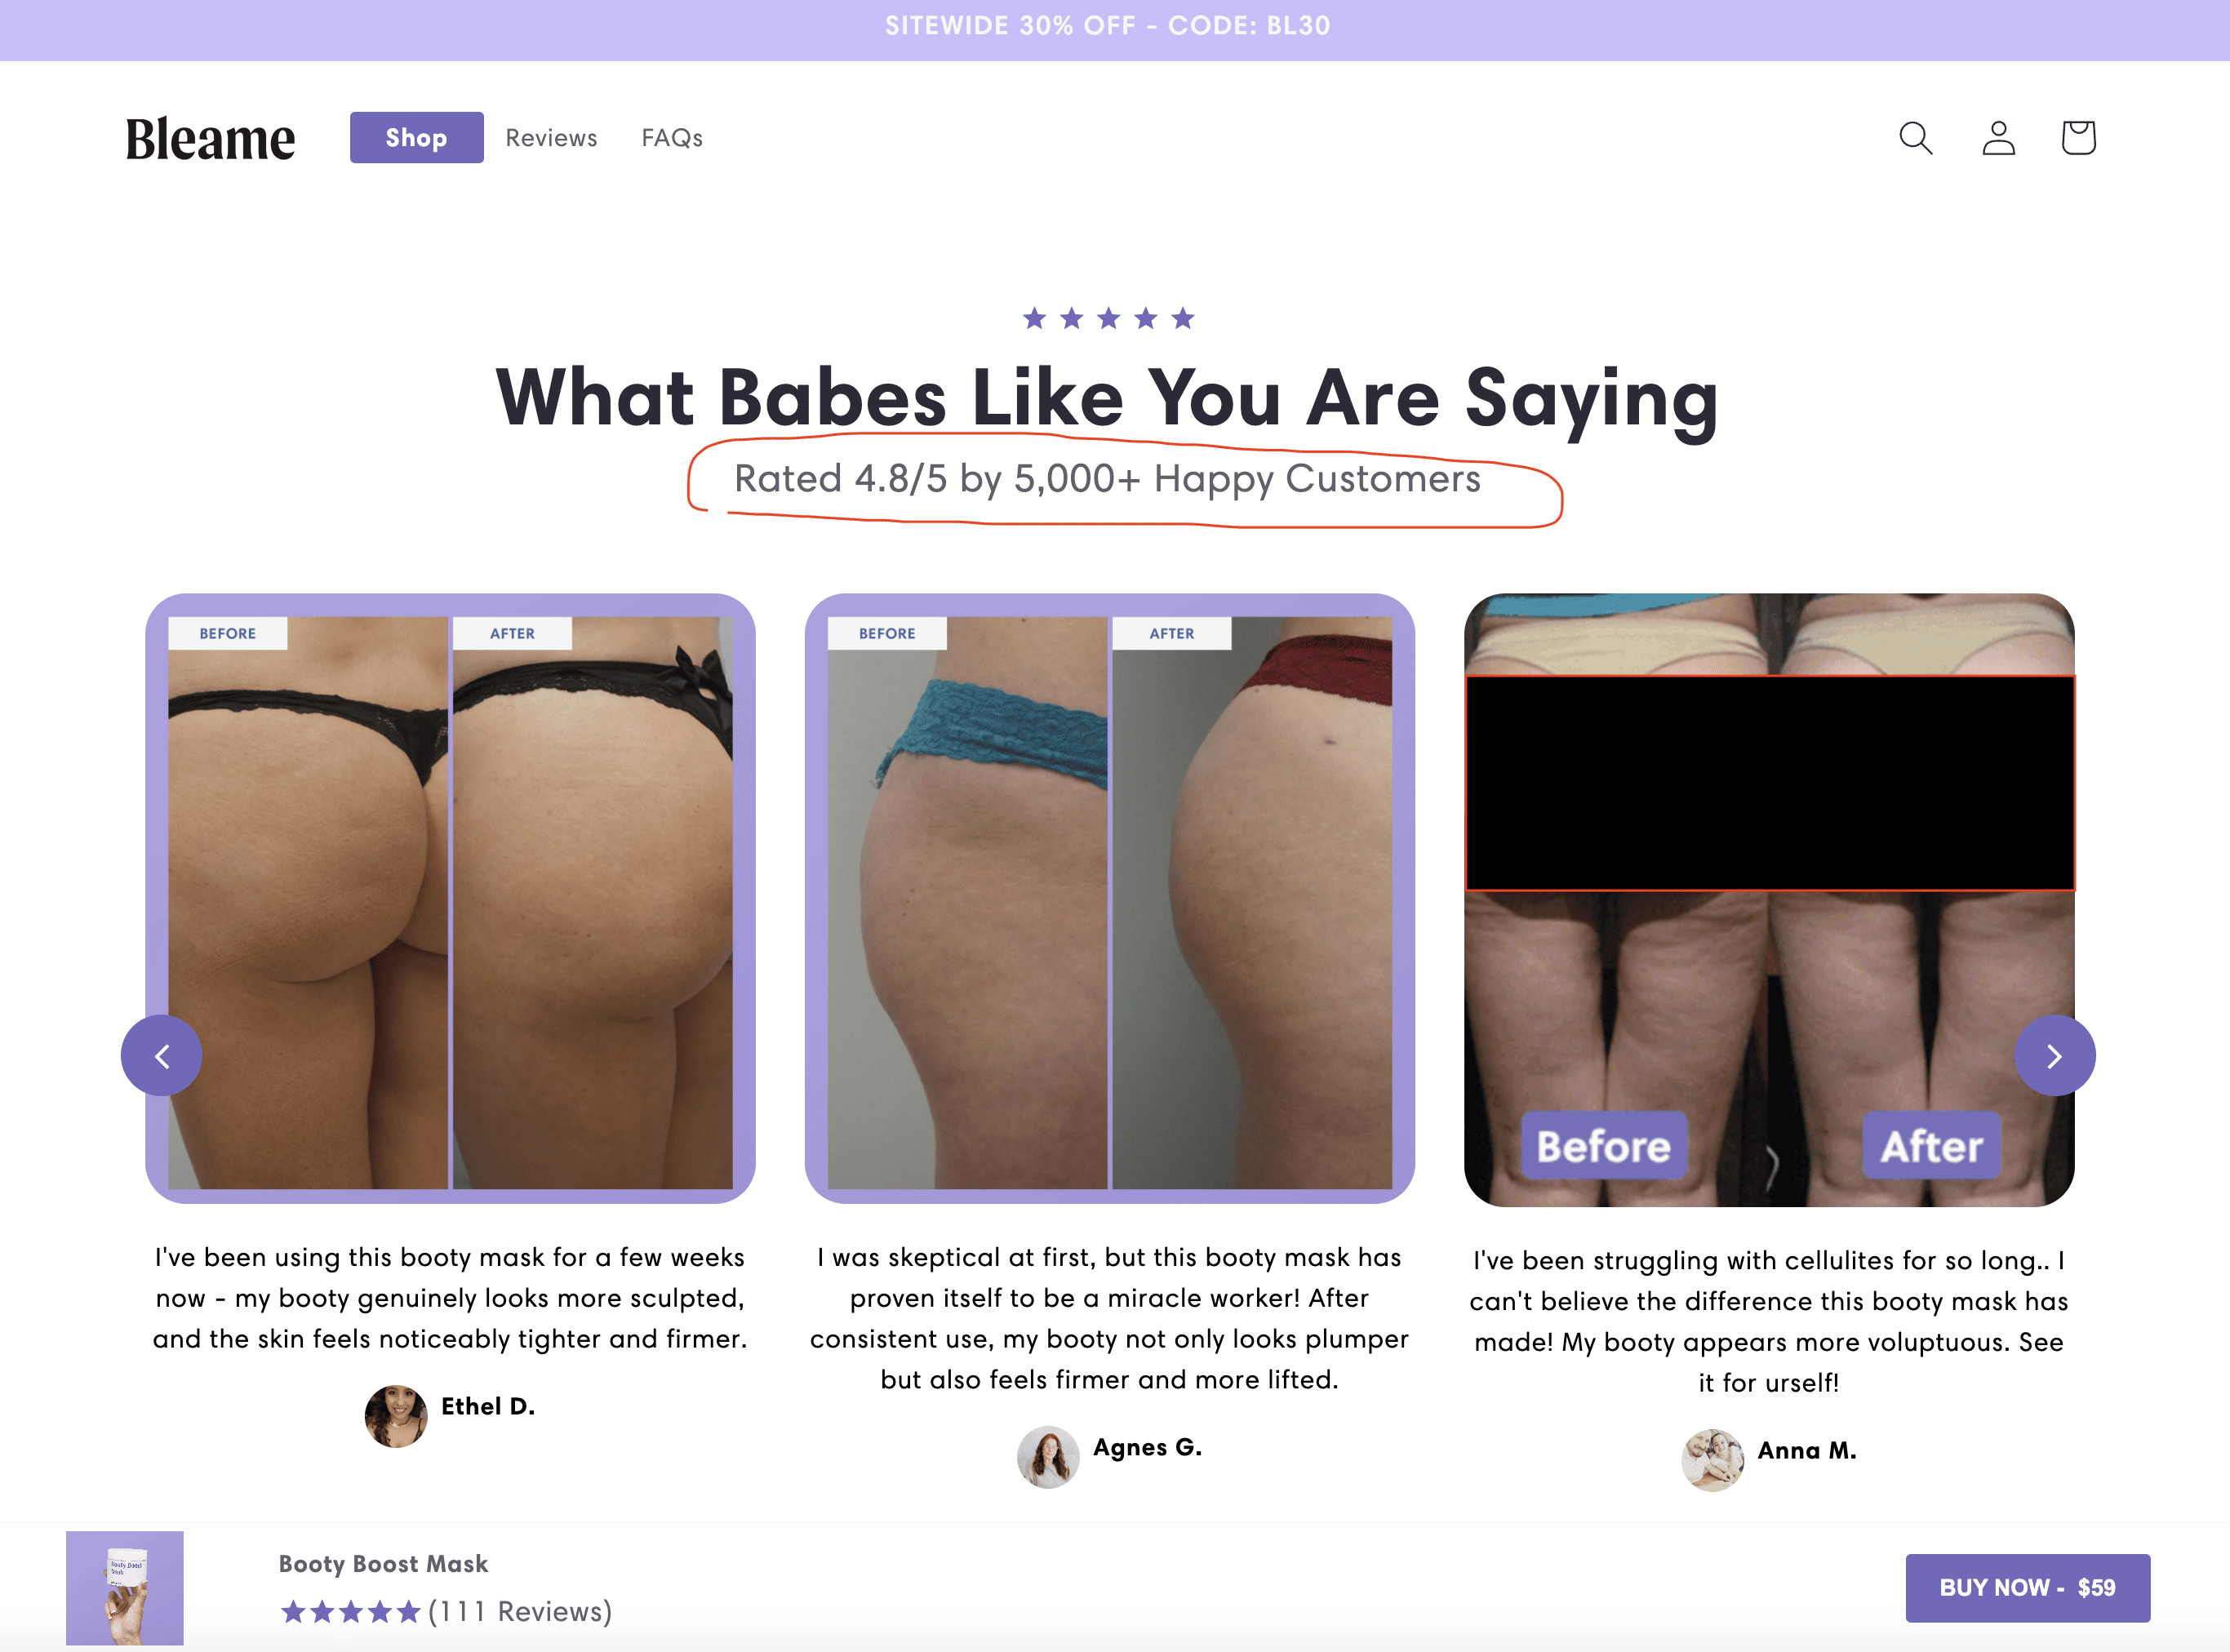 screenshot of bleame product page for booty boost mask that claims they have 5K reviews in just 11 days. 